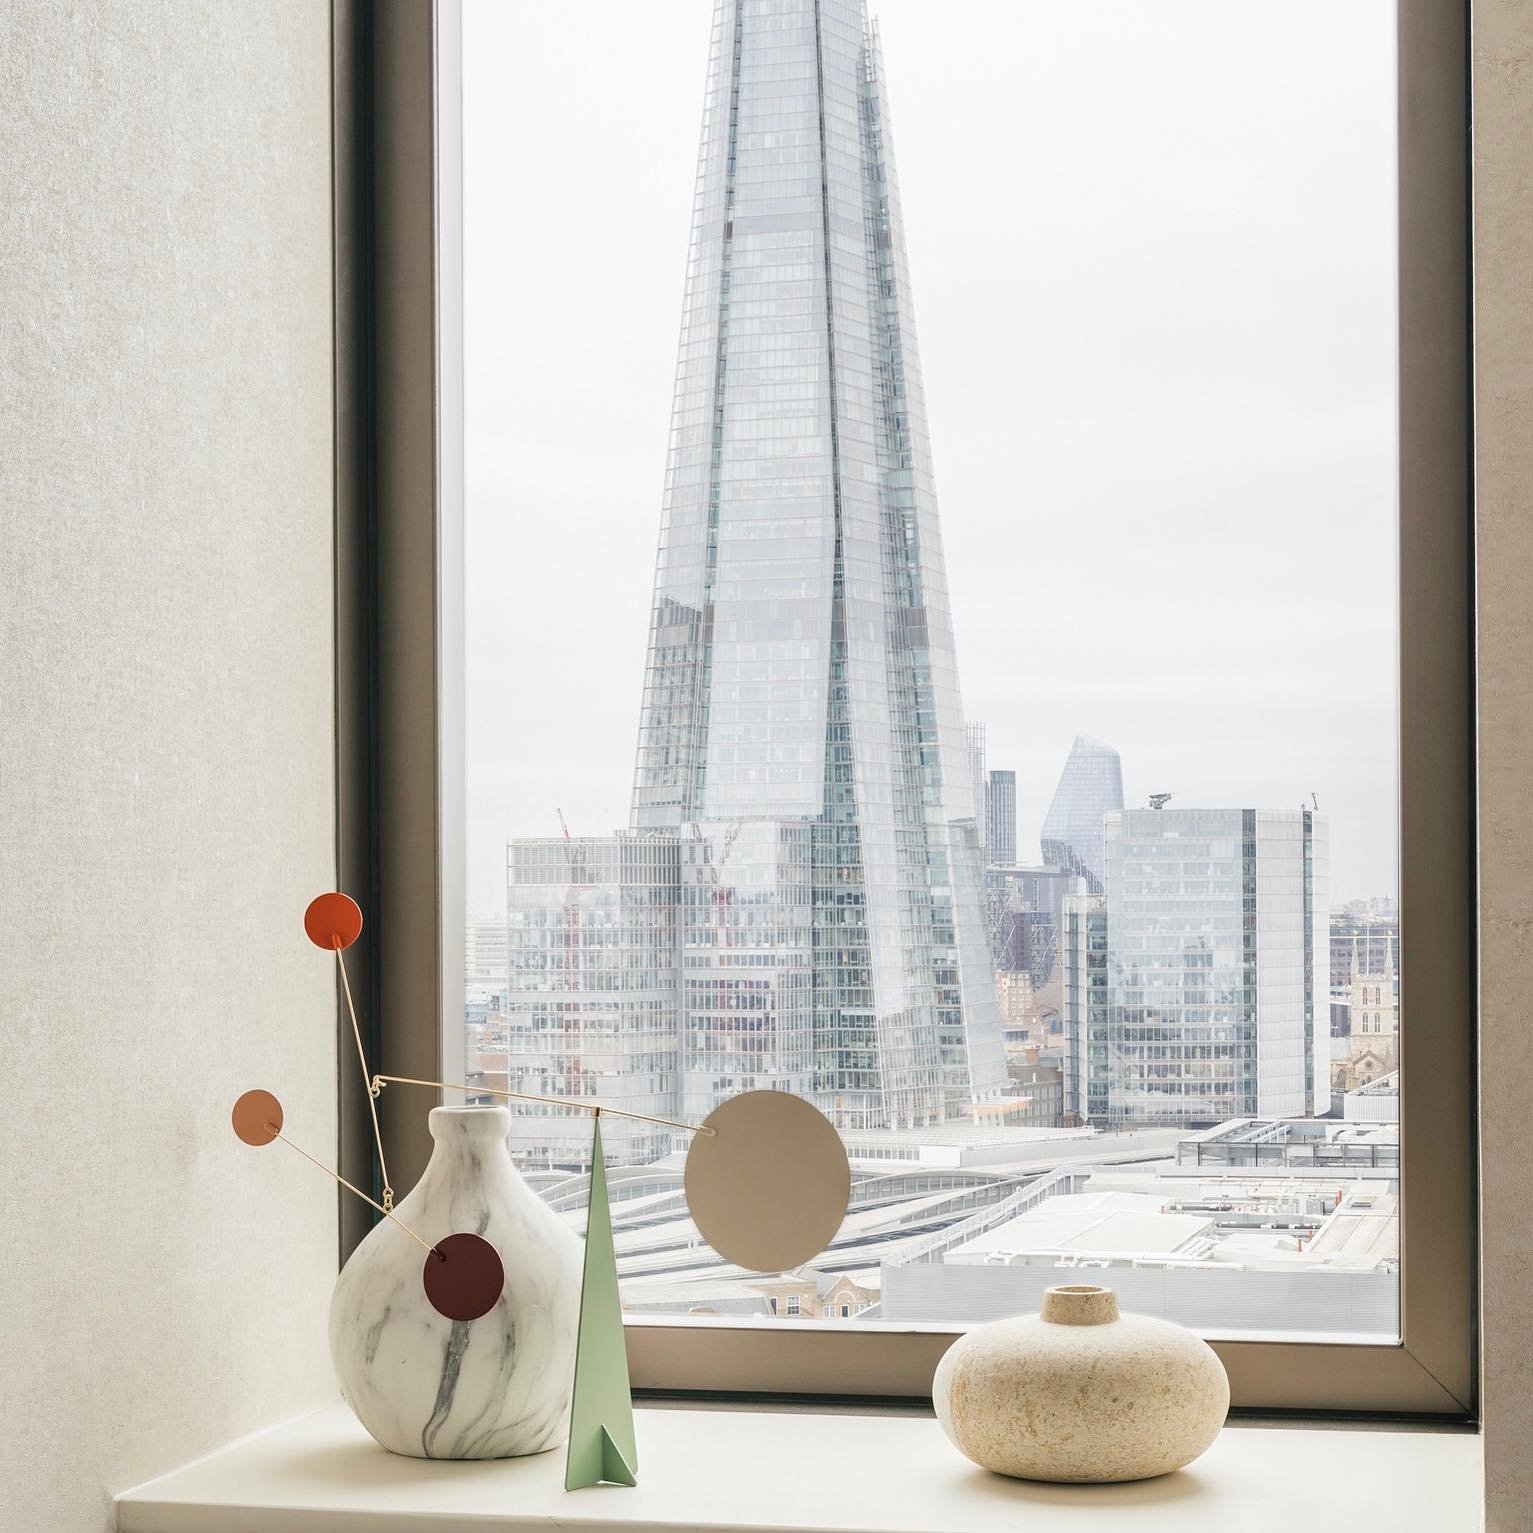 One of the many views from our One Tower Bridge project. 
Accessories are a great way of adding additional interest to a otherwise redundant space, such as a window sill. 
This carefully built mobile by Volta @theconranshopofficial reflects its backg